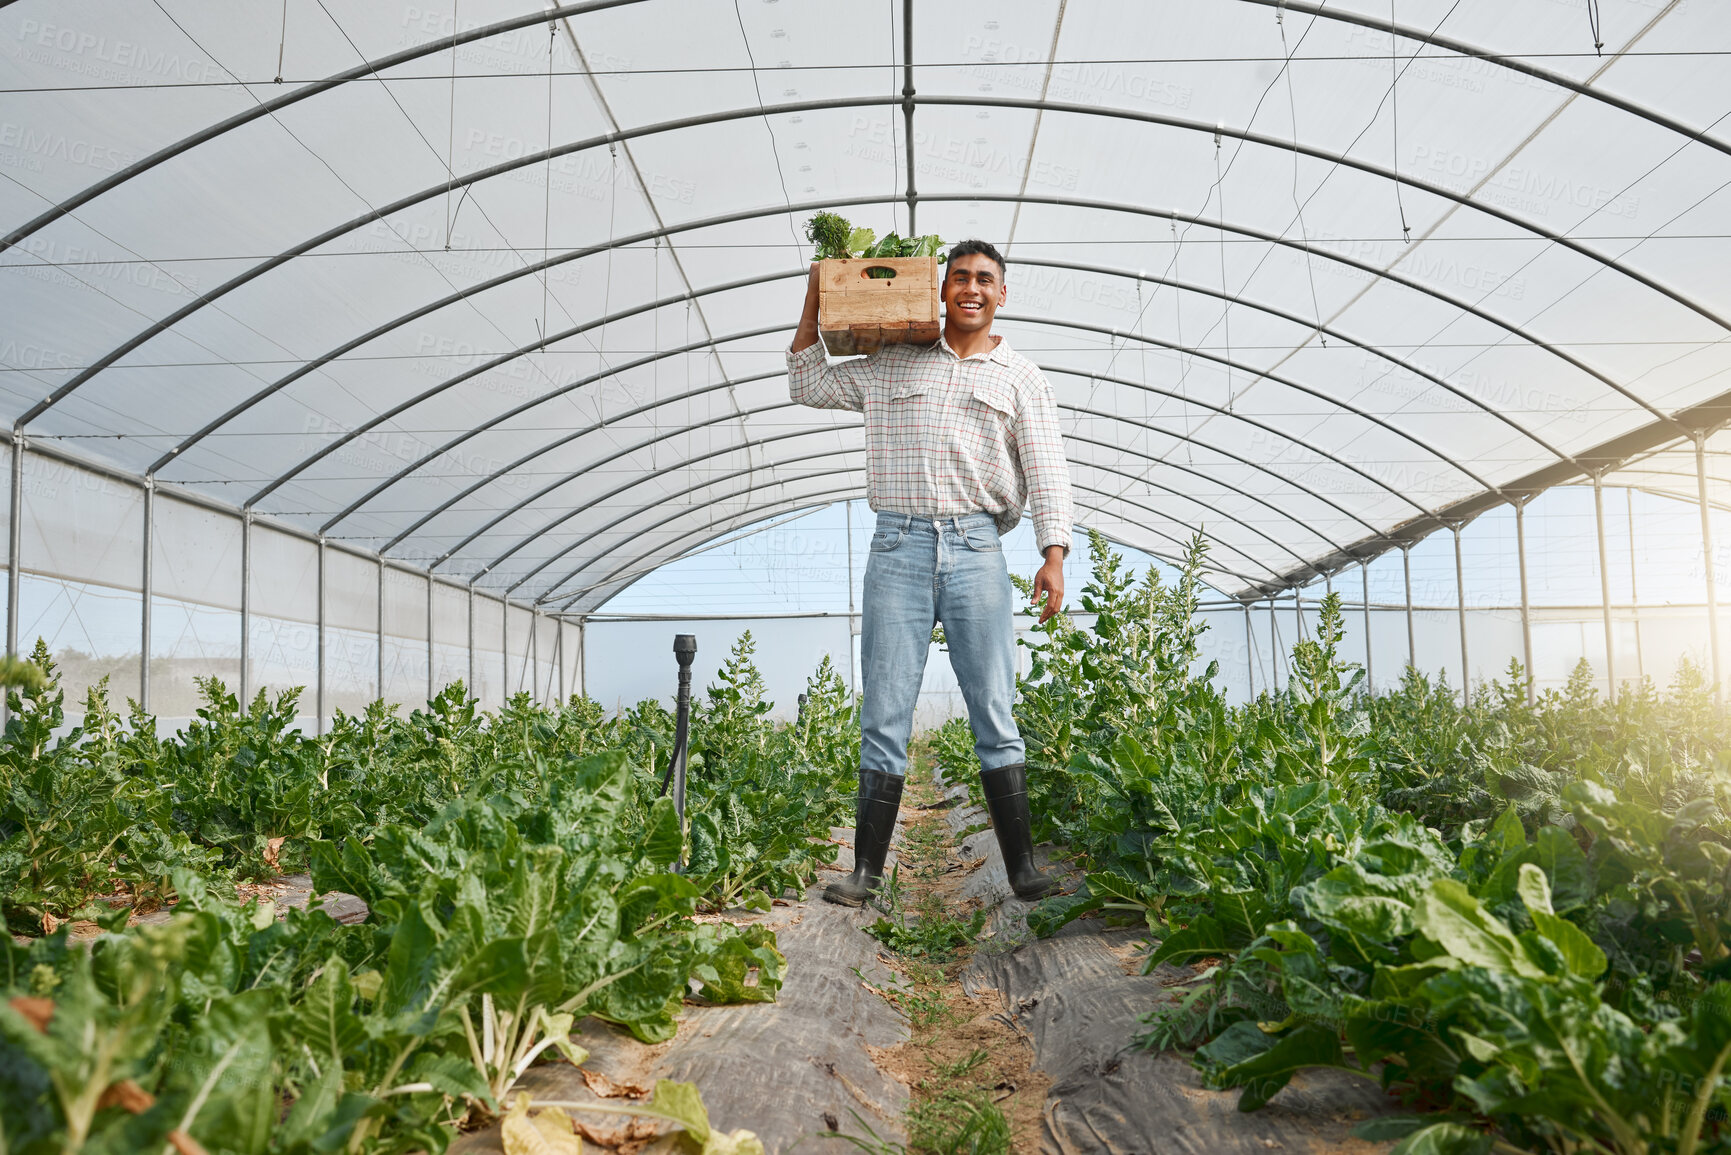 Buy stock photo Portrait of a young man holding a crate of fresh produce while working in a greenhouse on a farm